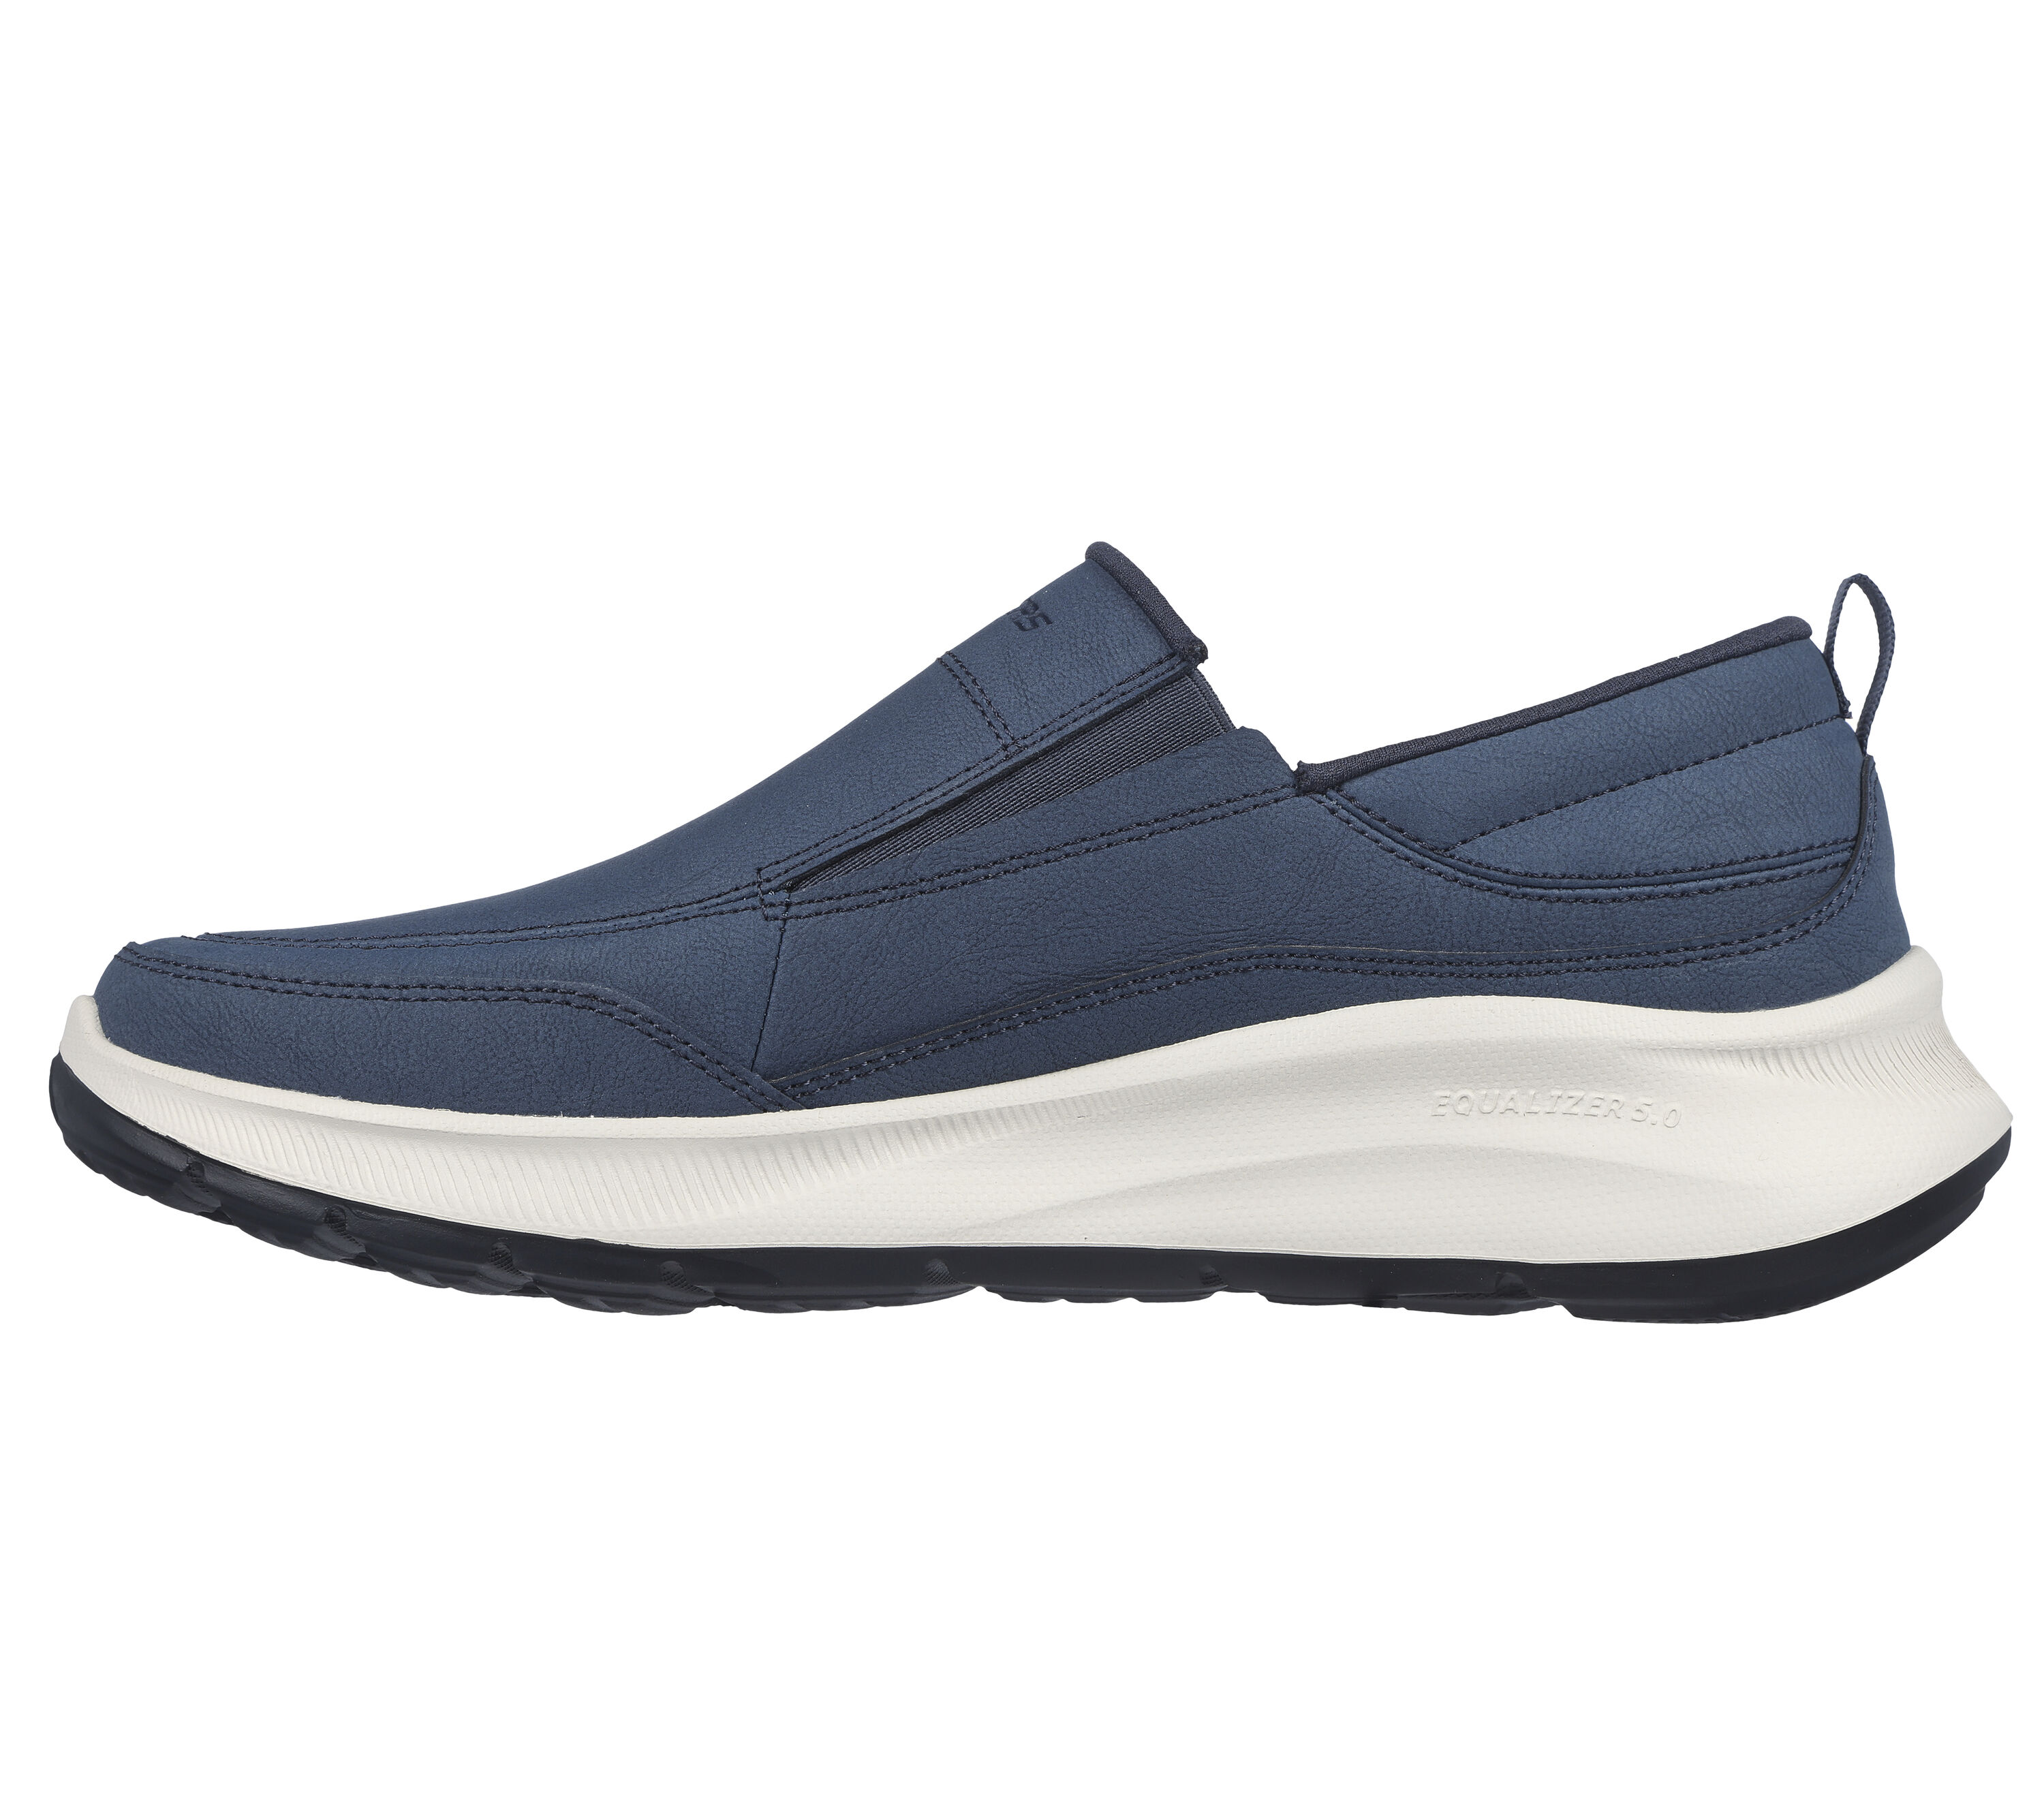 Relaxed Fit: Equalizer 5.0 - Harvey | SKECHERS UK